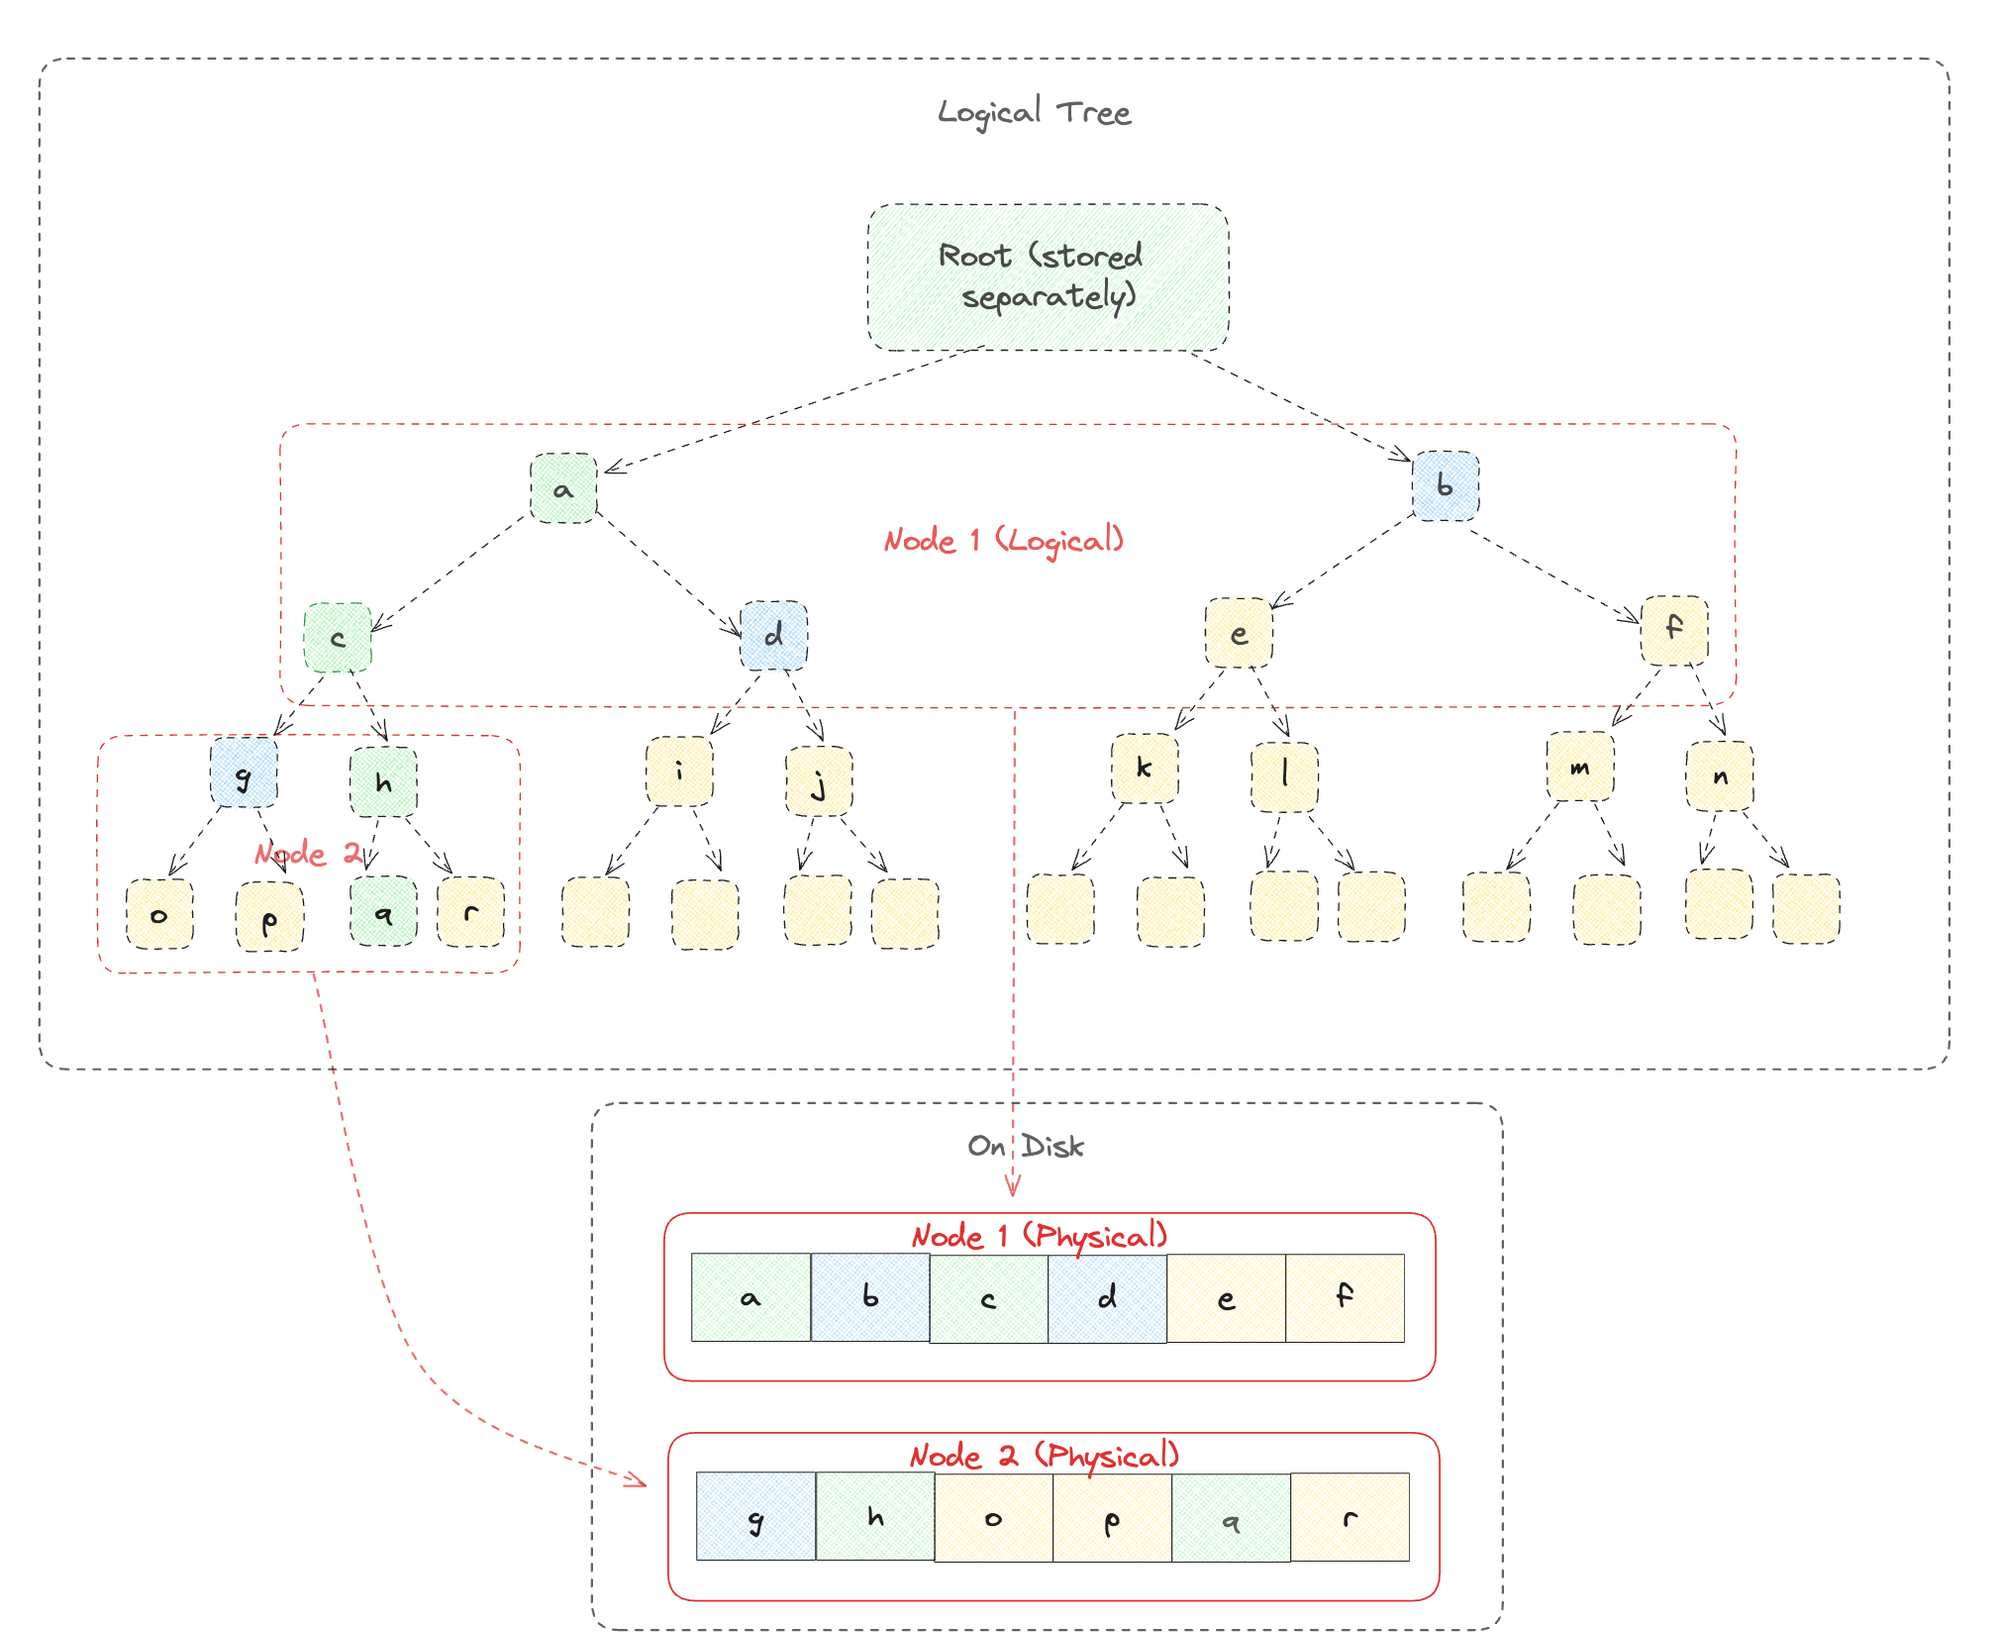 A diagram showing the physical and logical layout of an example merkle tree during an insertion at q. Modified items are shown in green, while siblings which are needed to compute the new root are shown in blue.